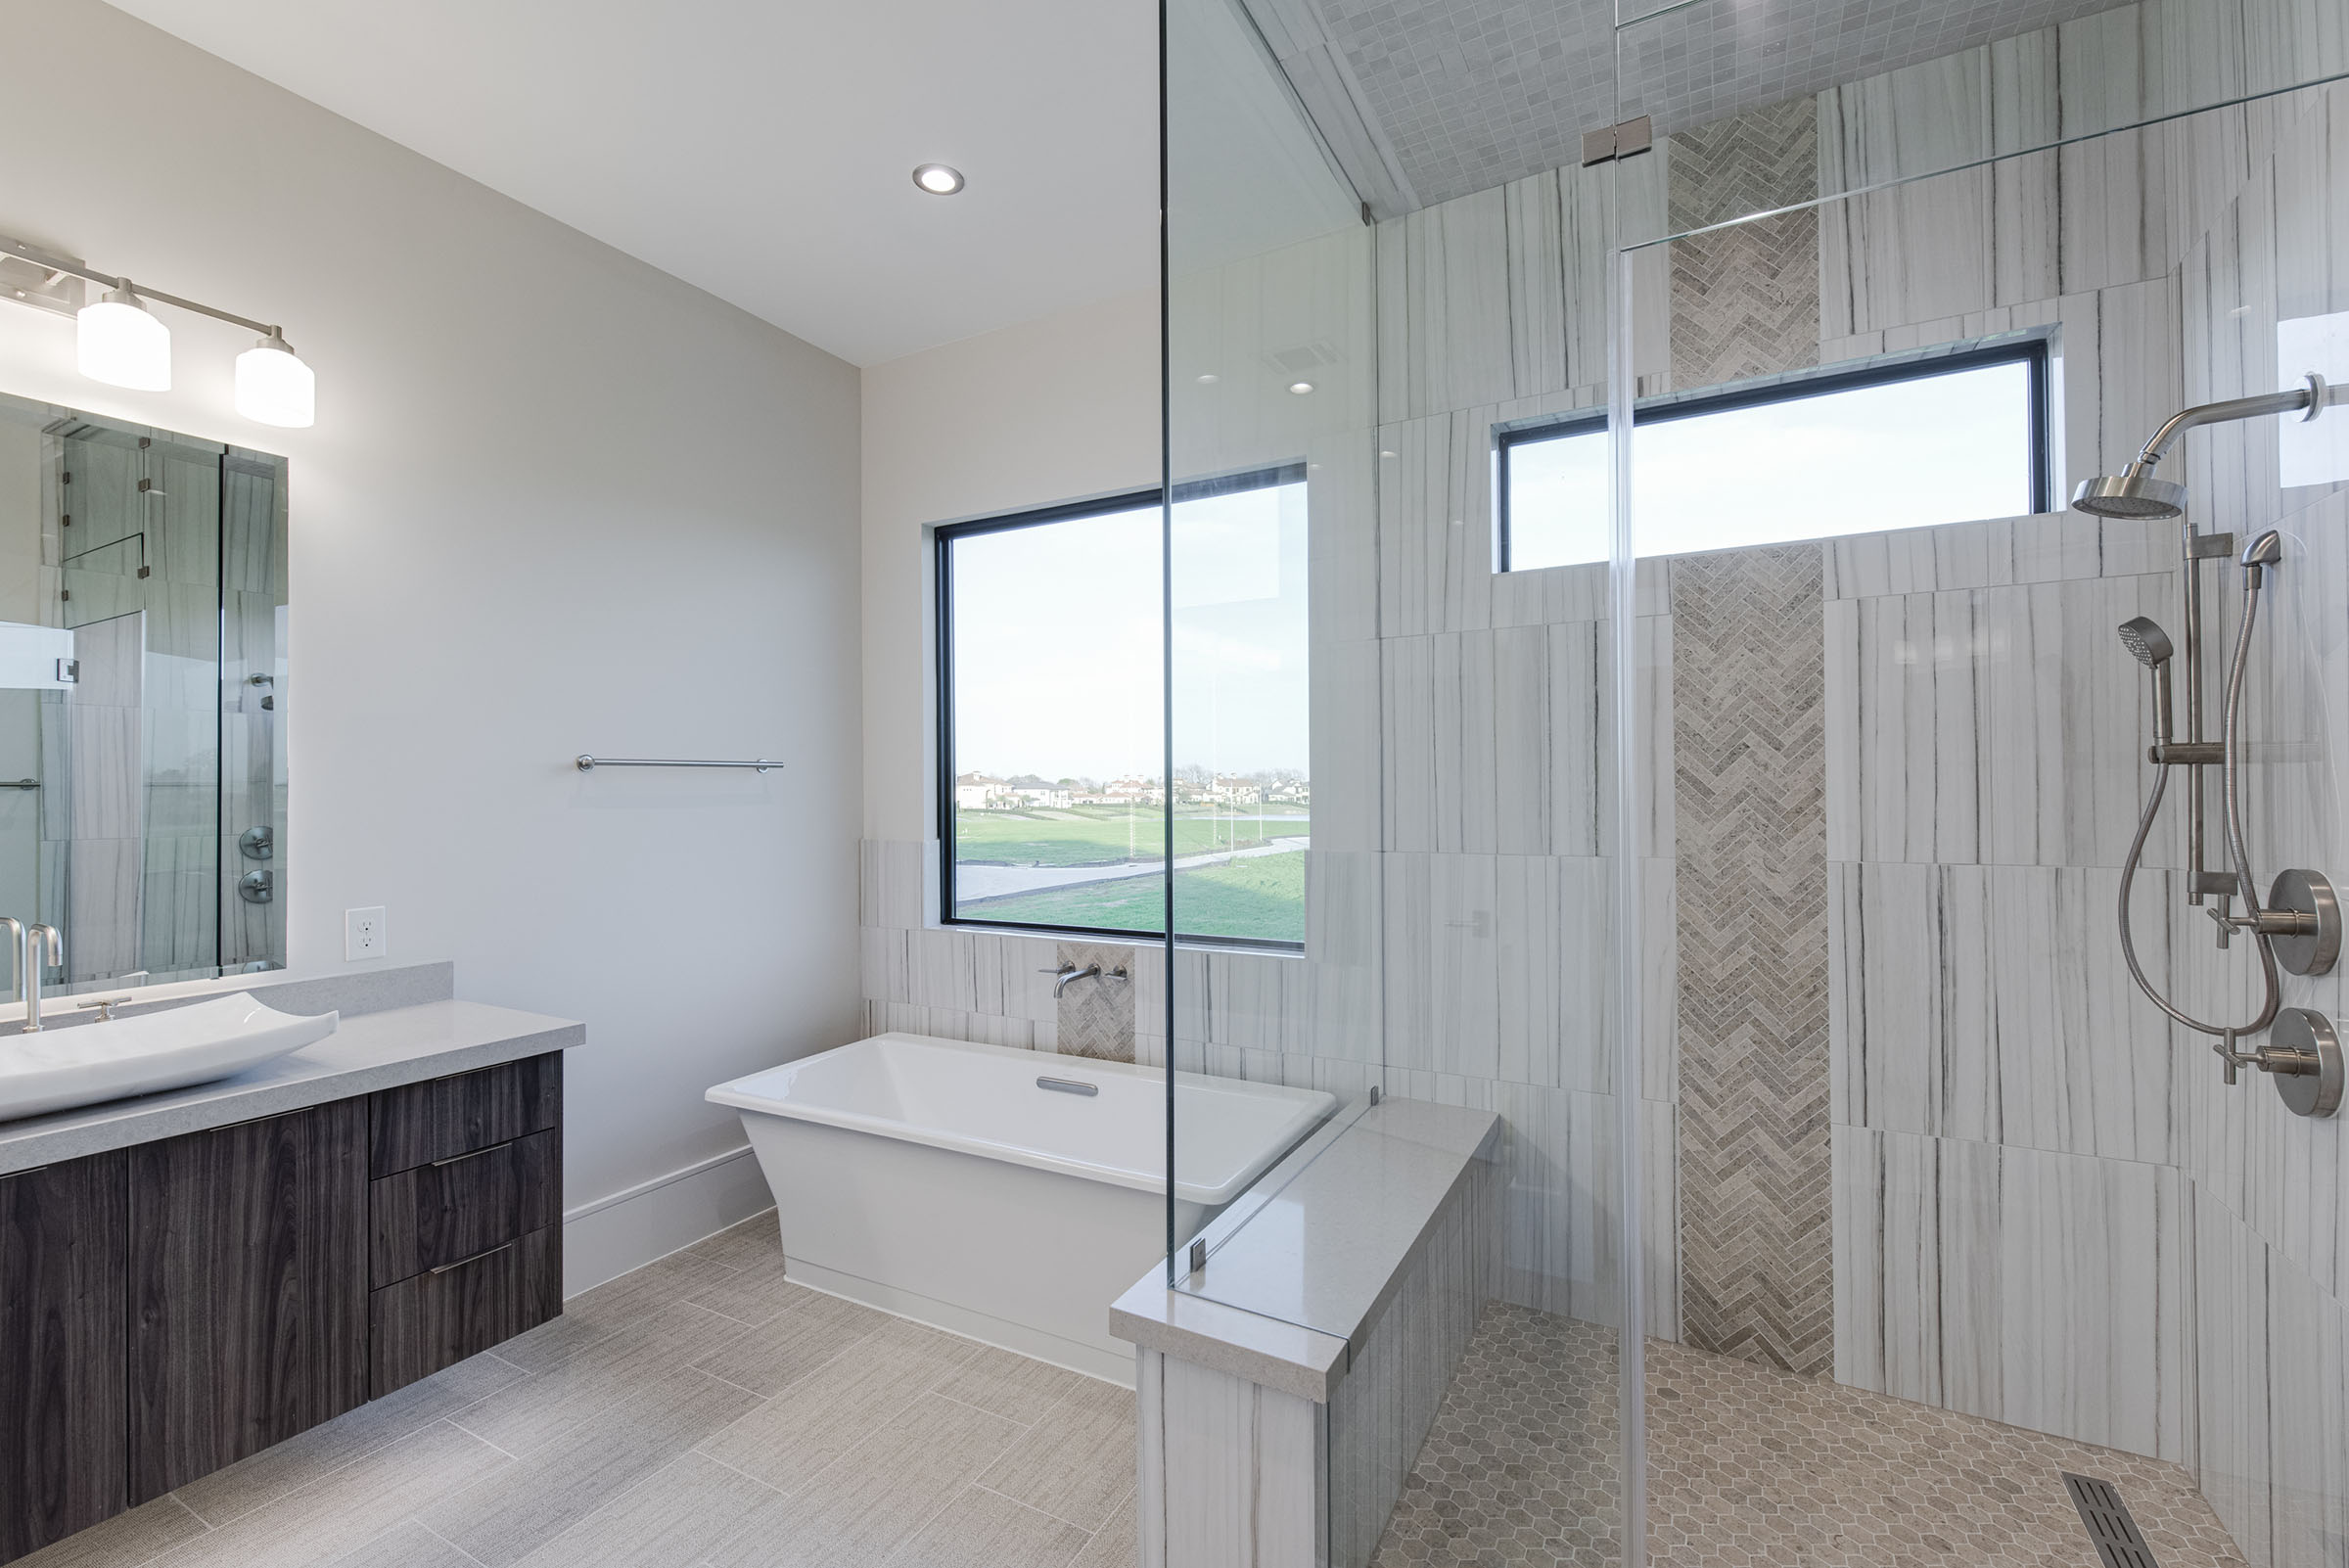 Lakes of Williams Ranch Bathrooms Image